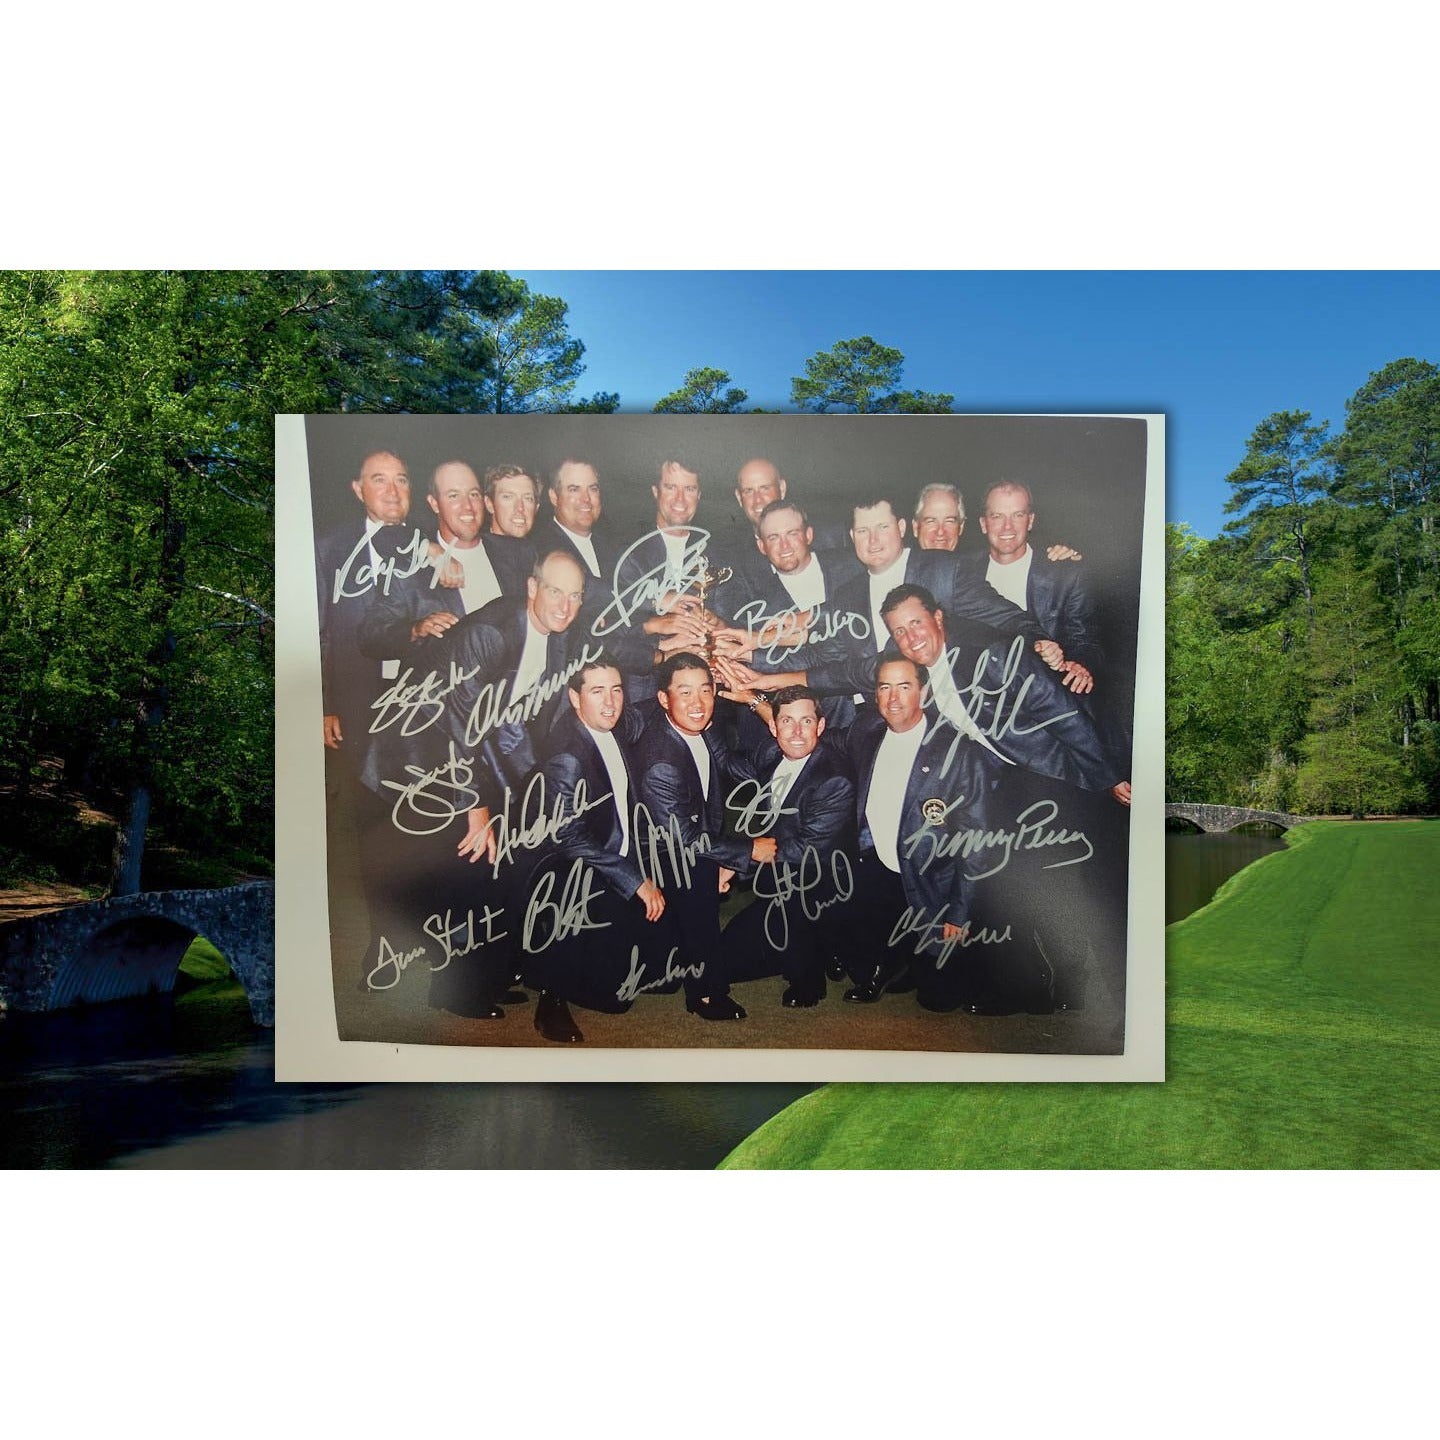 2008 USA Ryder Cup team signed Phil Mickelson Ray Floyd Paul Azinger